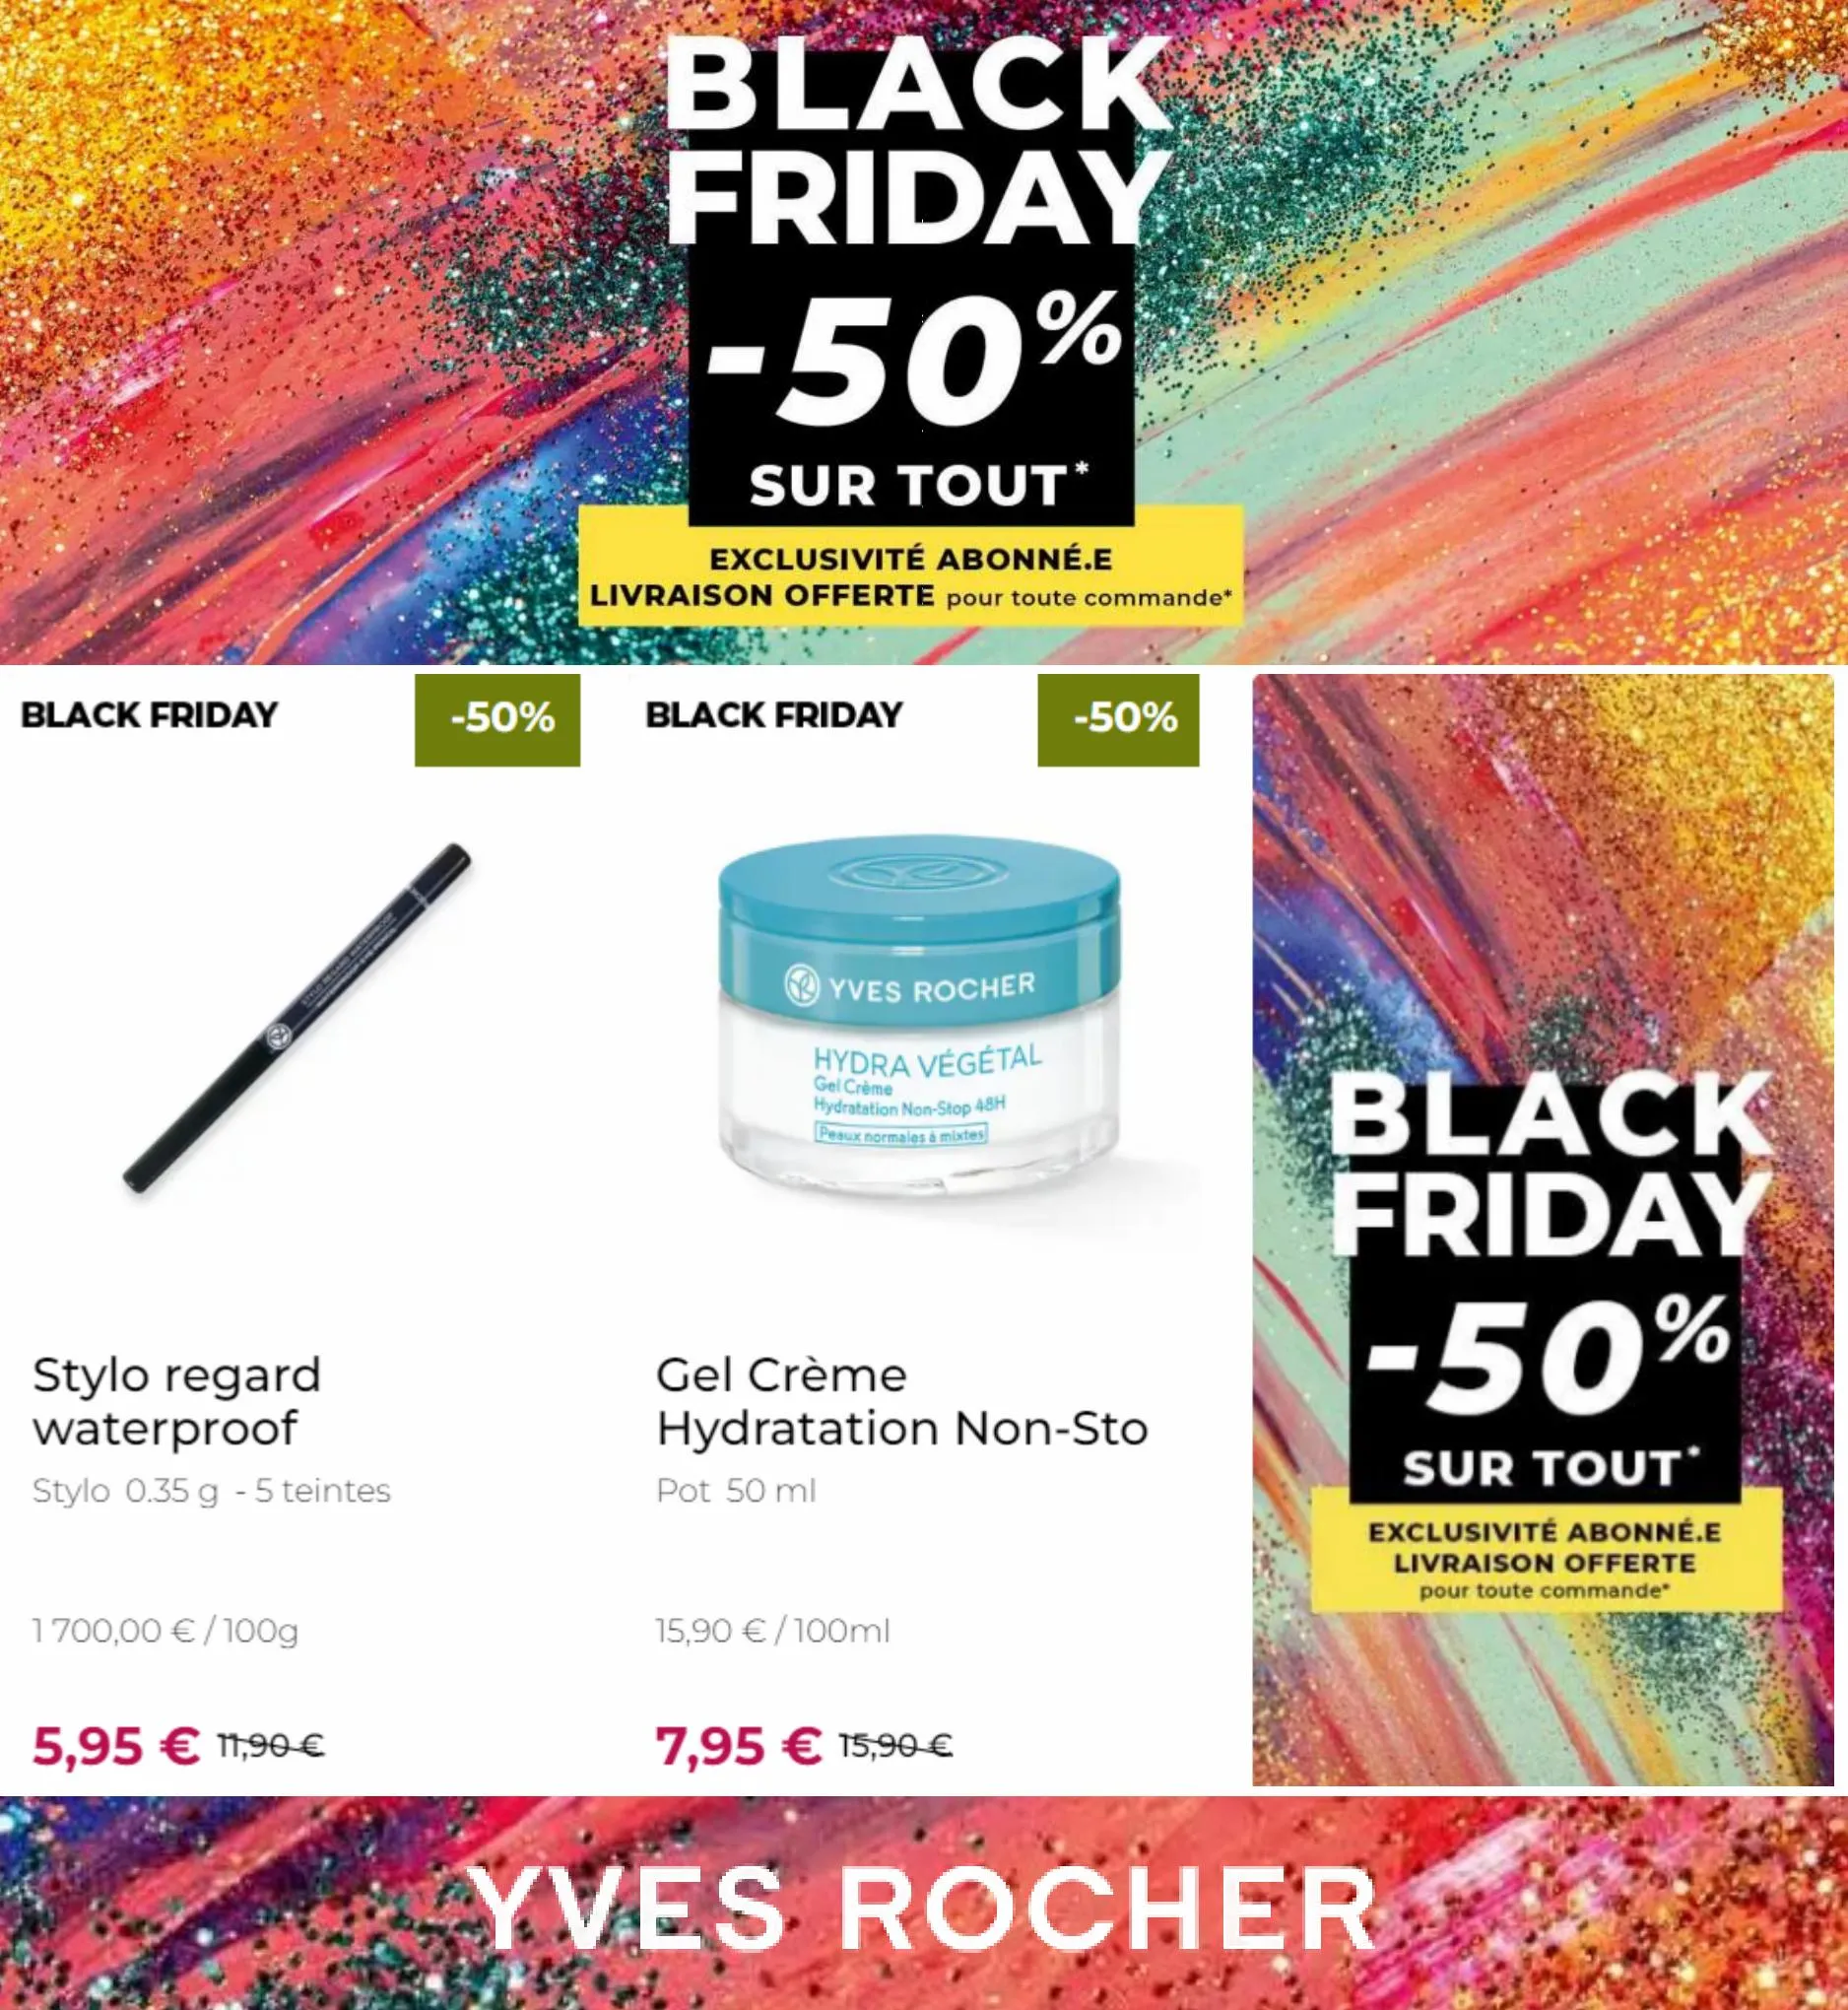 Catalogue Yves Rocher Black Friday, page 00003